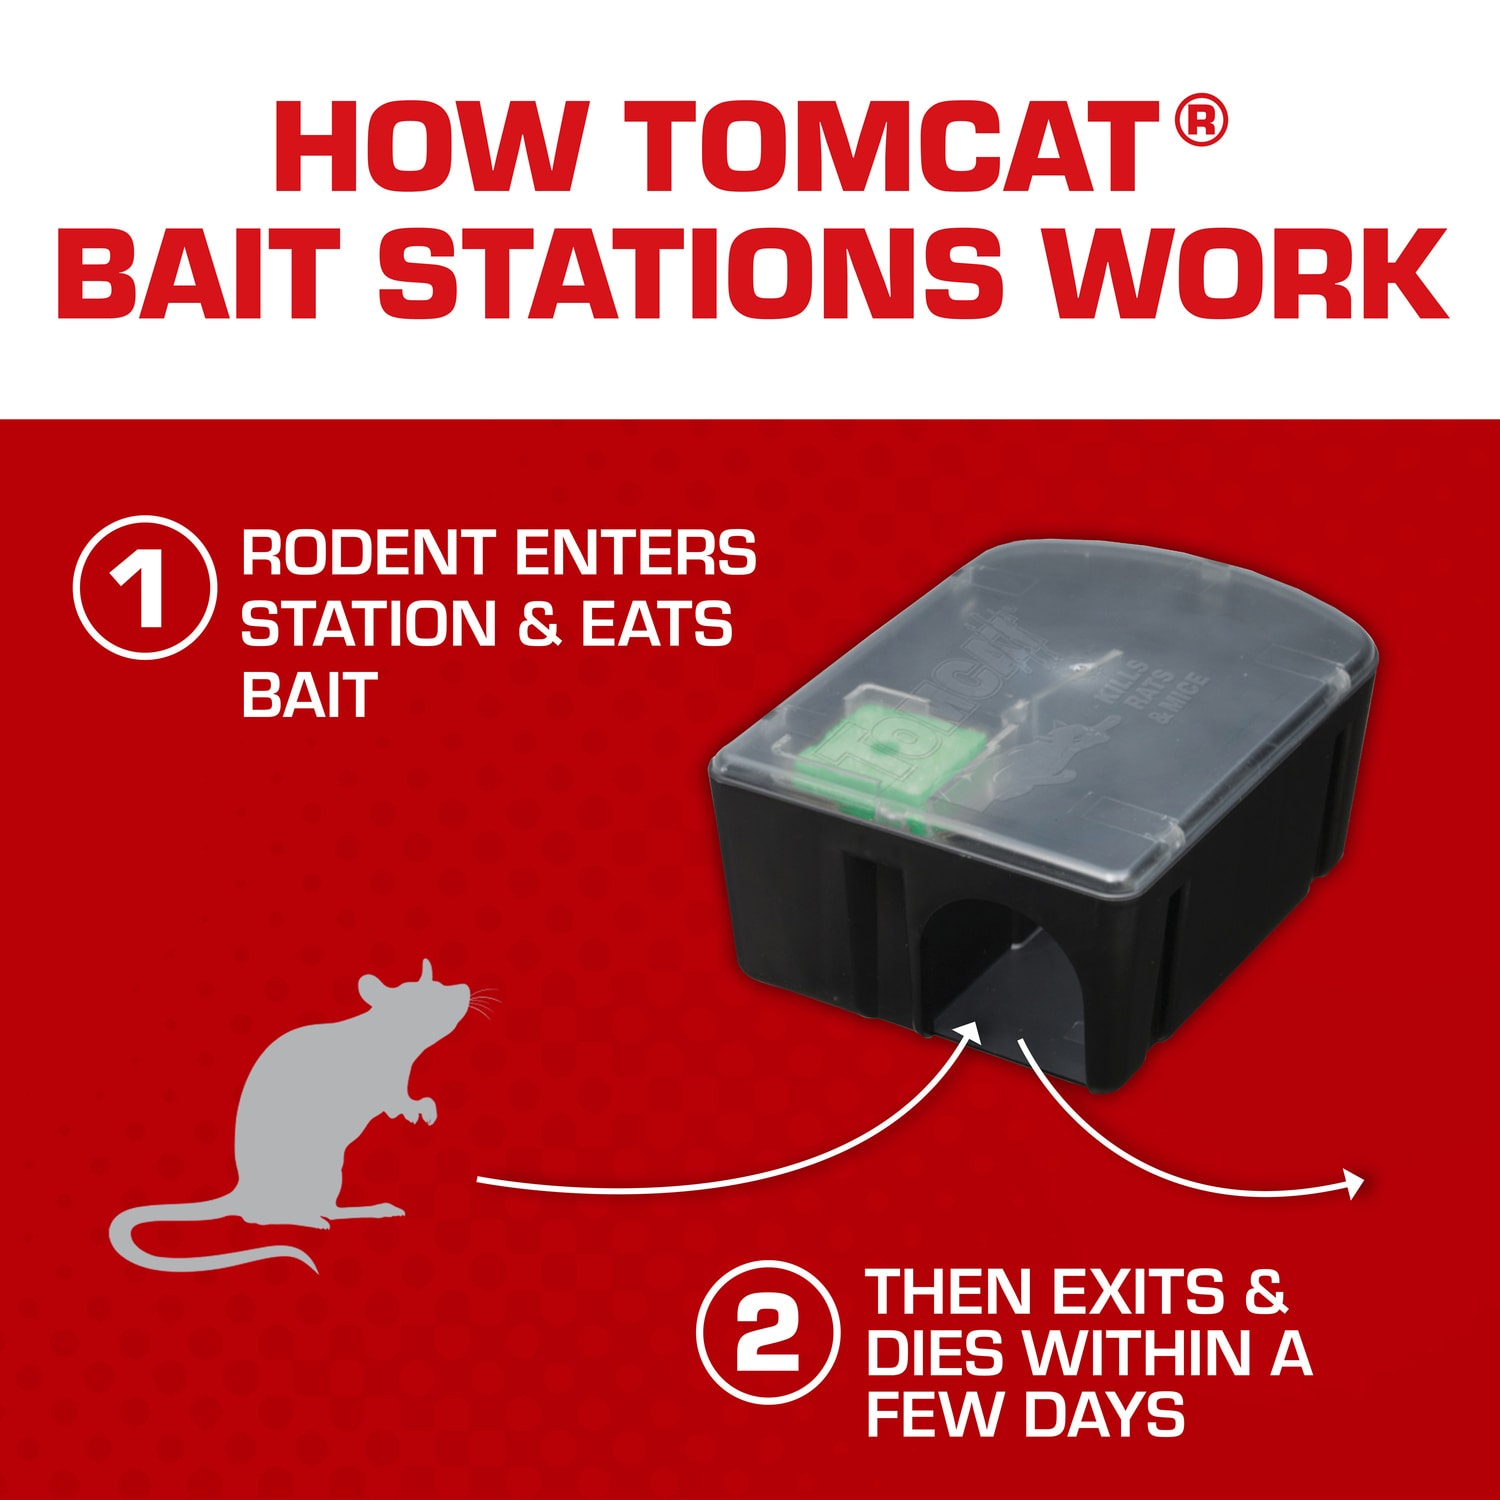 Buy Tomcat Kill & Contain Mouse Trap